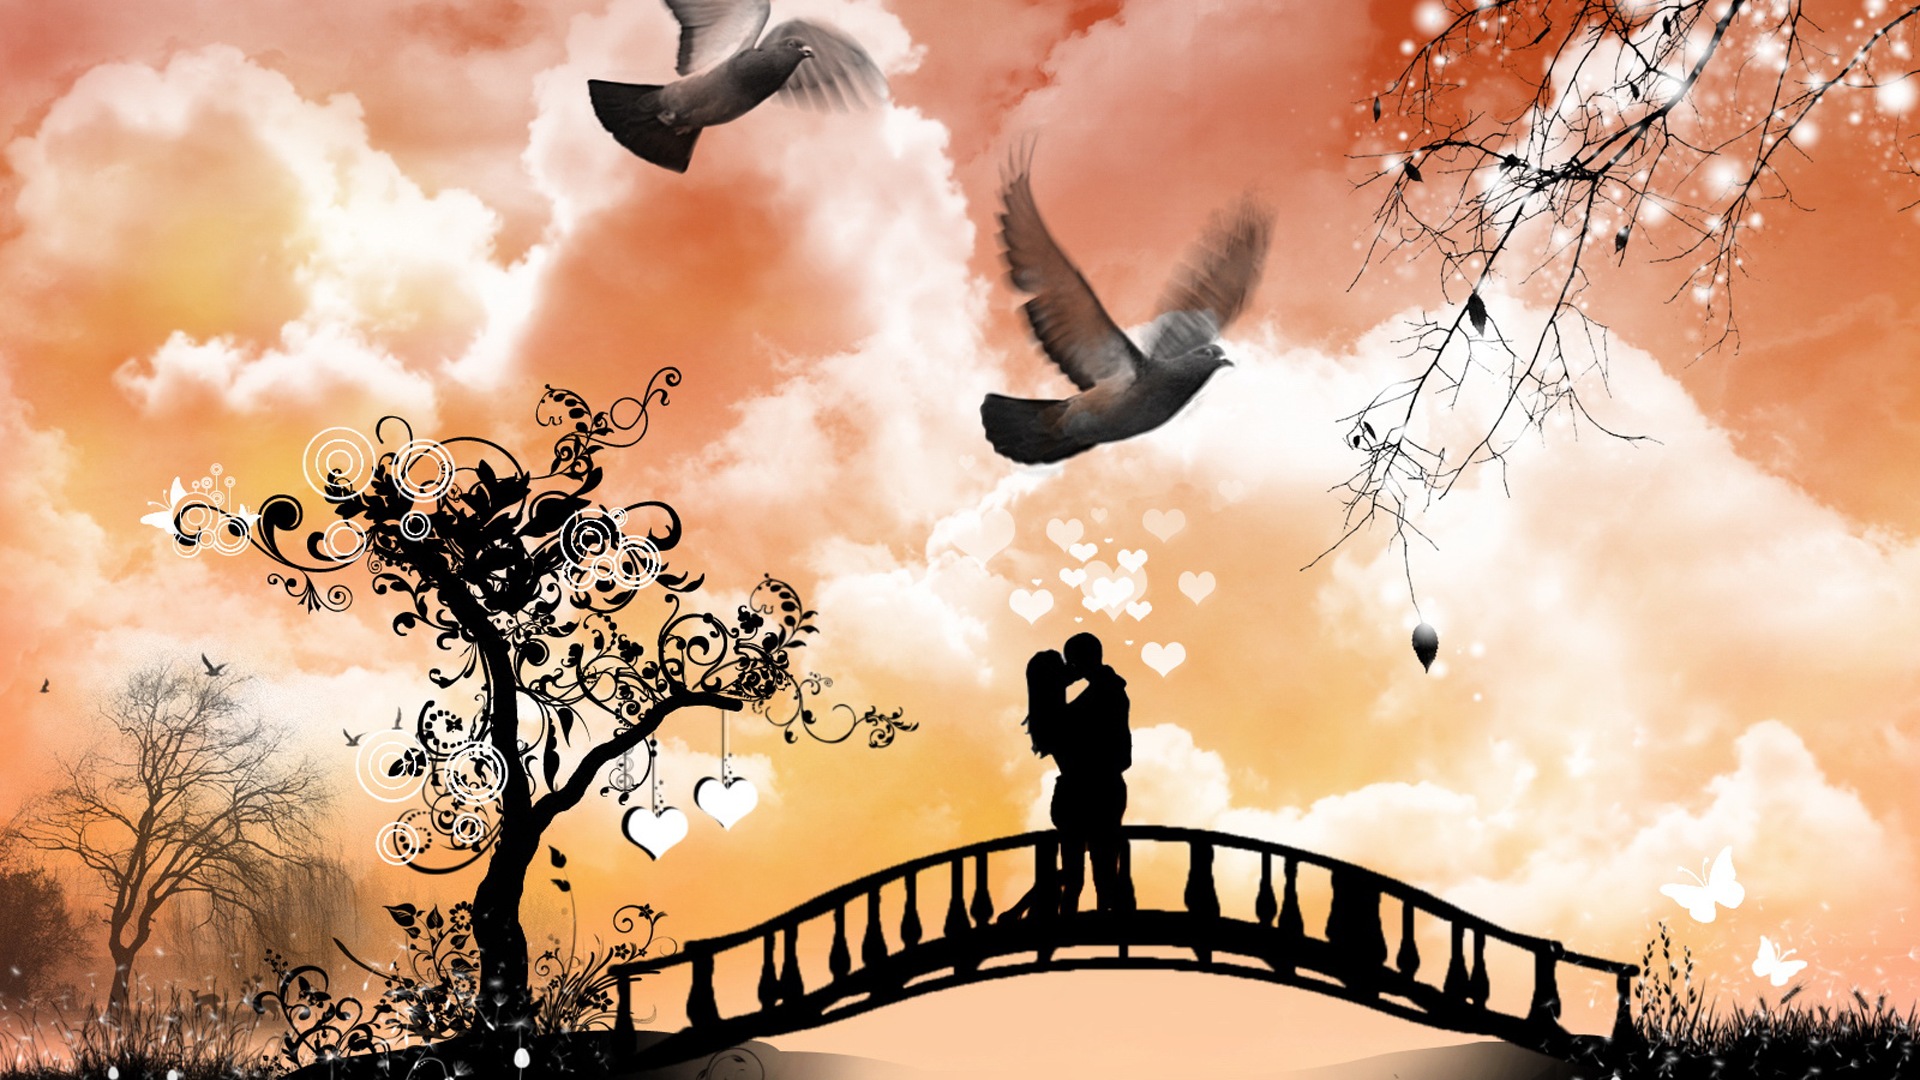 Warm and romantic Valentine's Day HD wallpapers #20 - 1920x1080